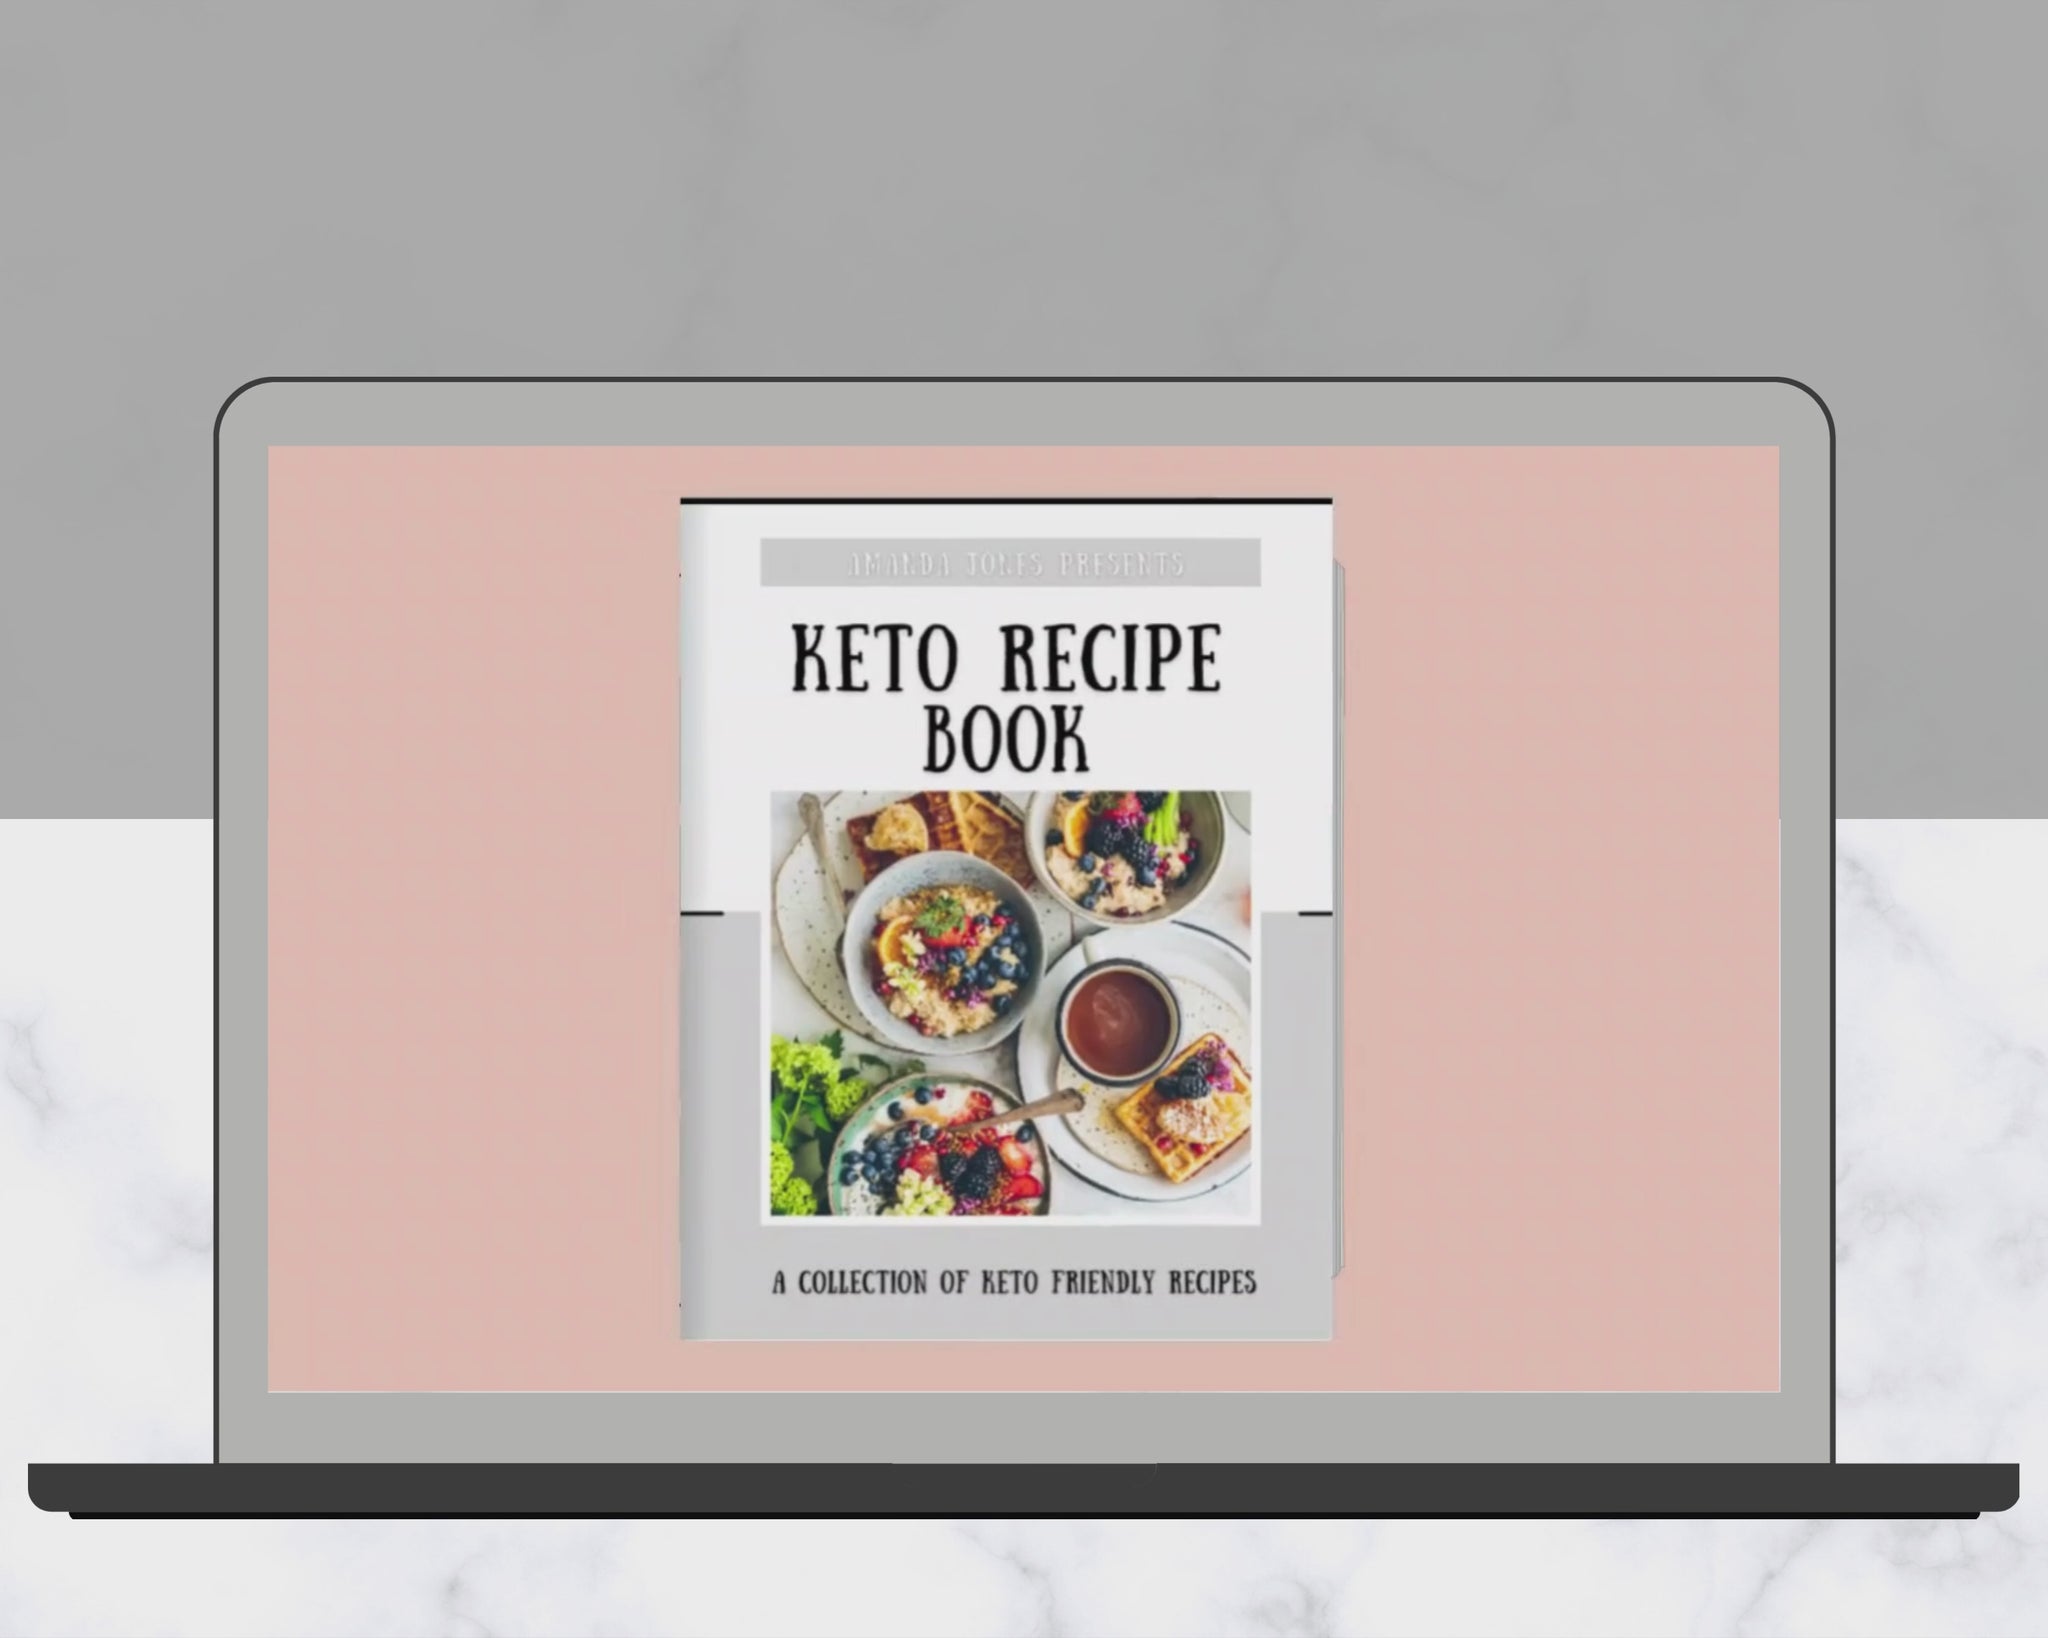 Make Your Own Cookbook - See Cookbook Templates